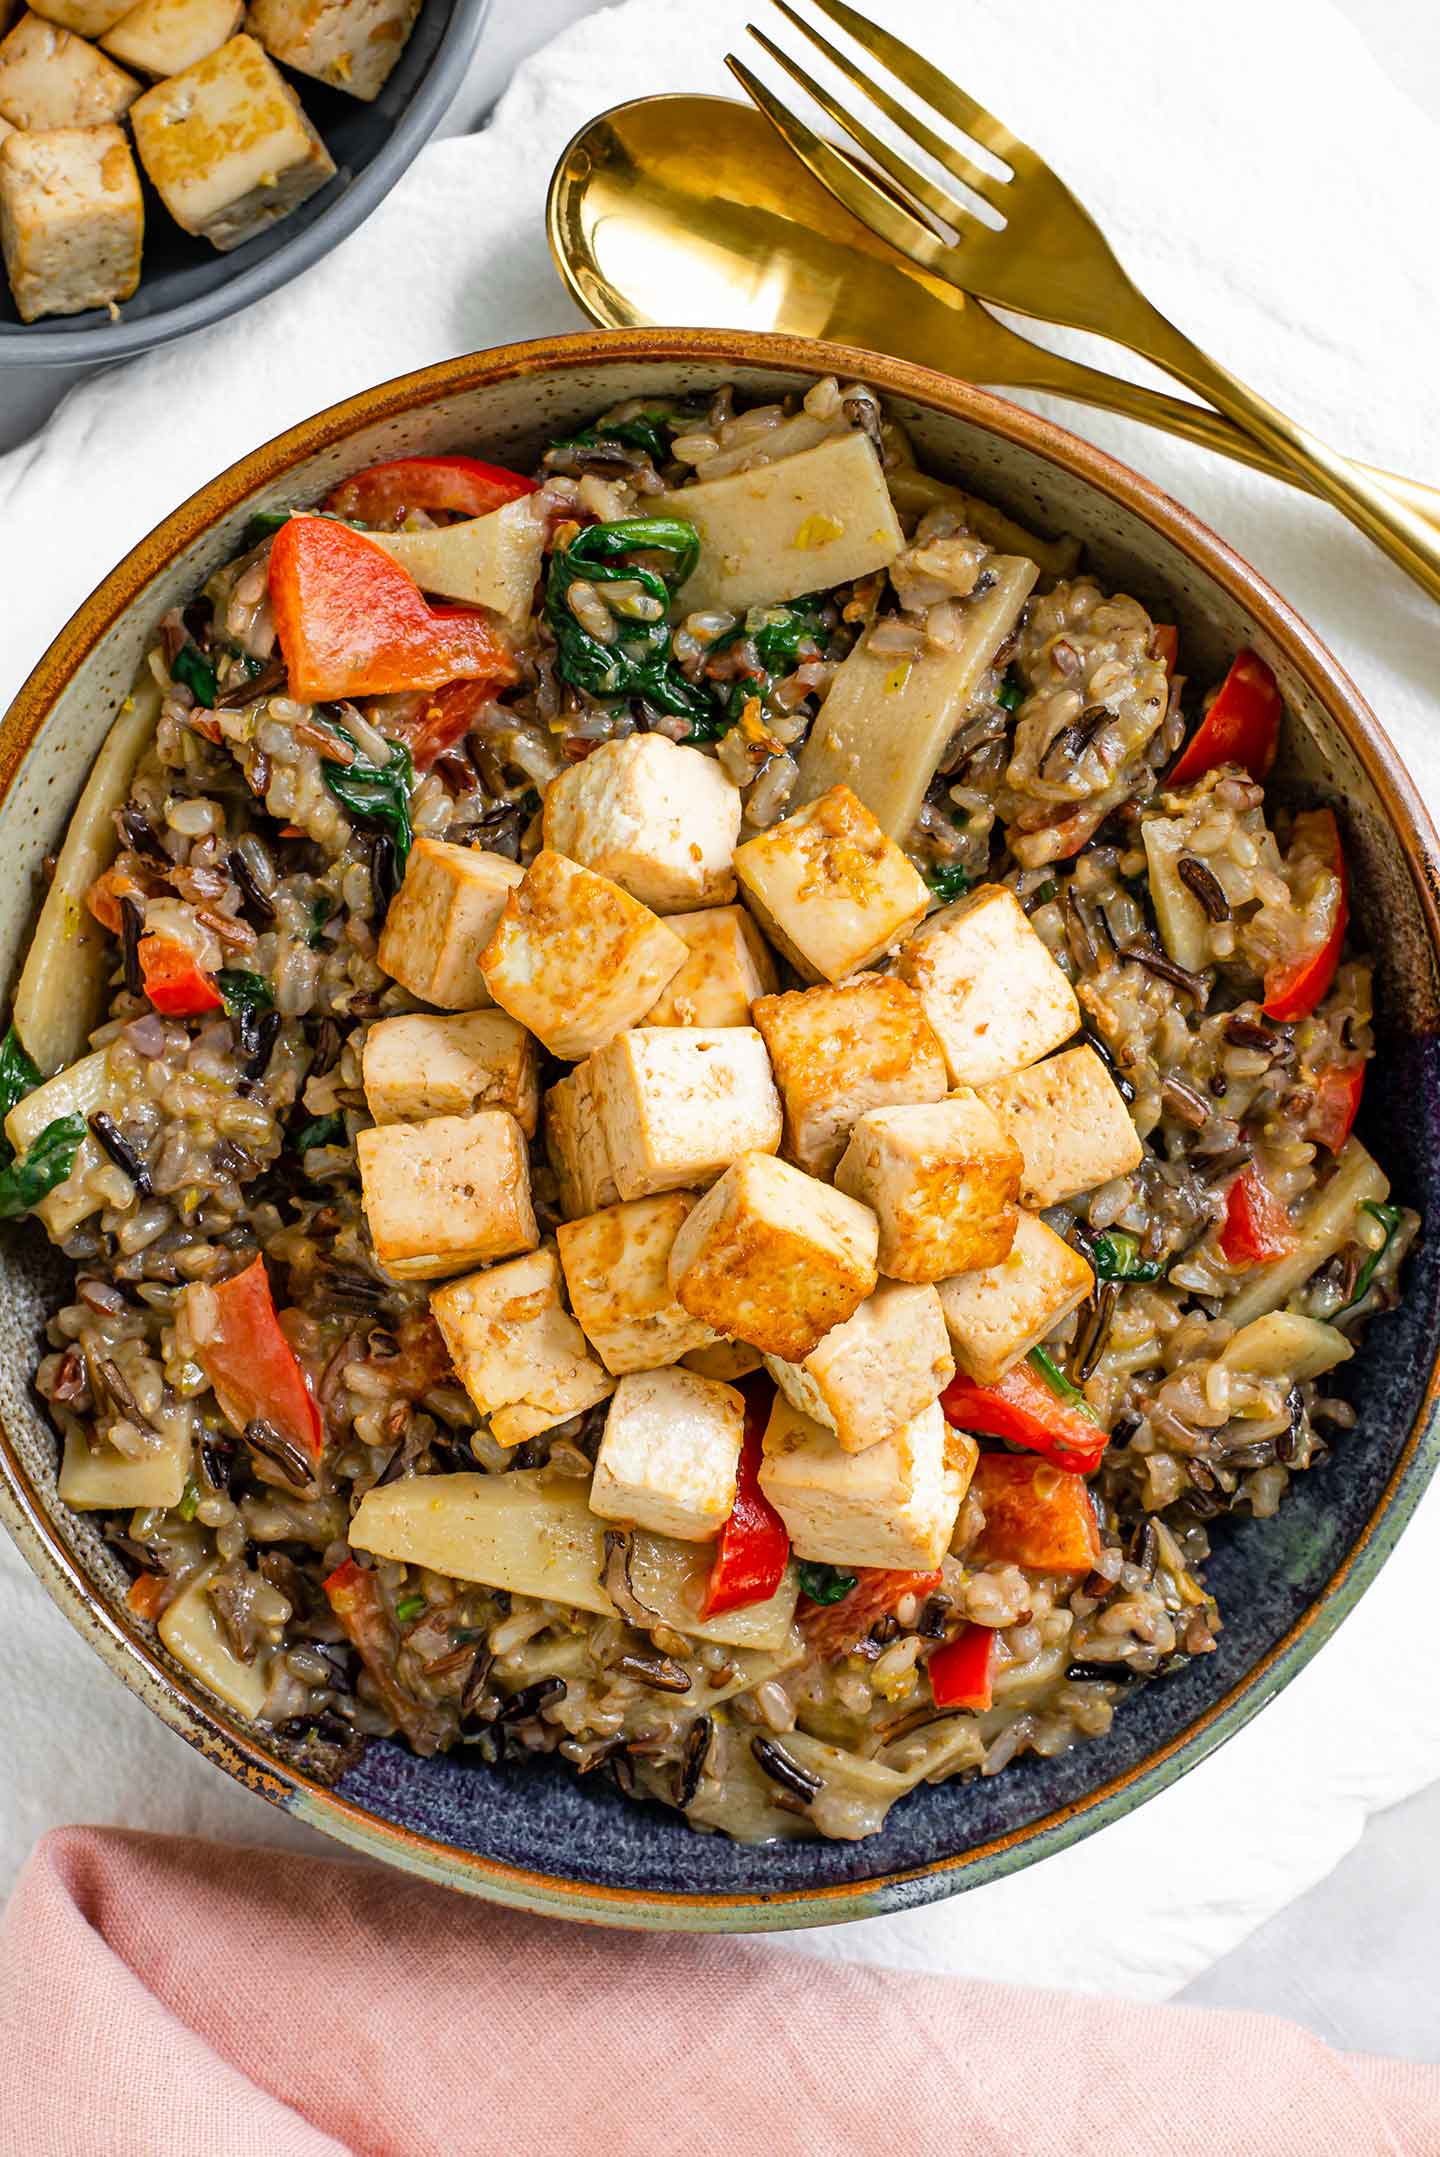 Top down view of green curry fried rice filling a shallow bowl. Wild rice mixed with bamboo shoots, red bell pepper, and spinach is topped with crispy tofu.